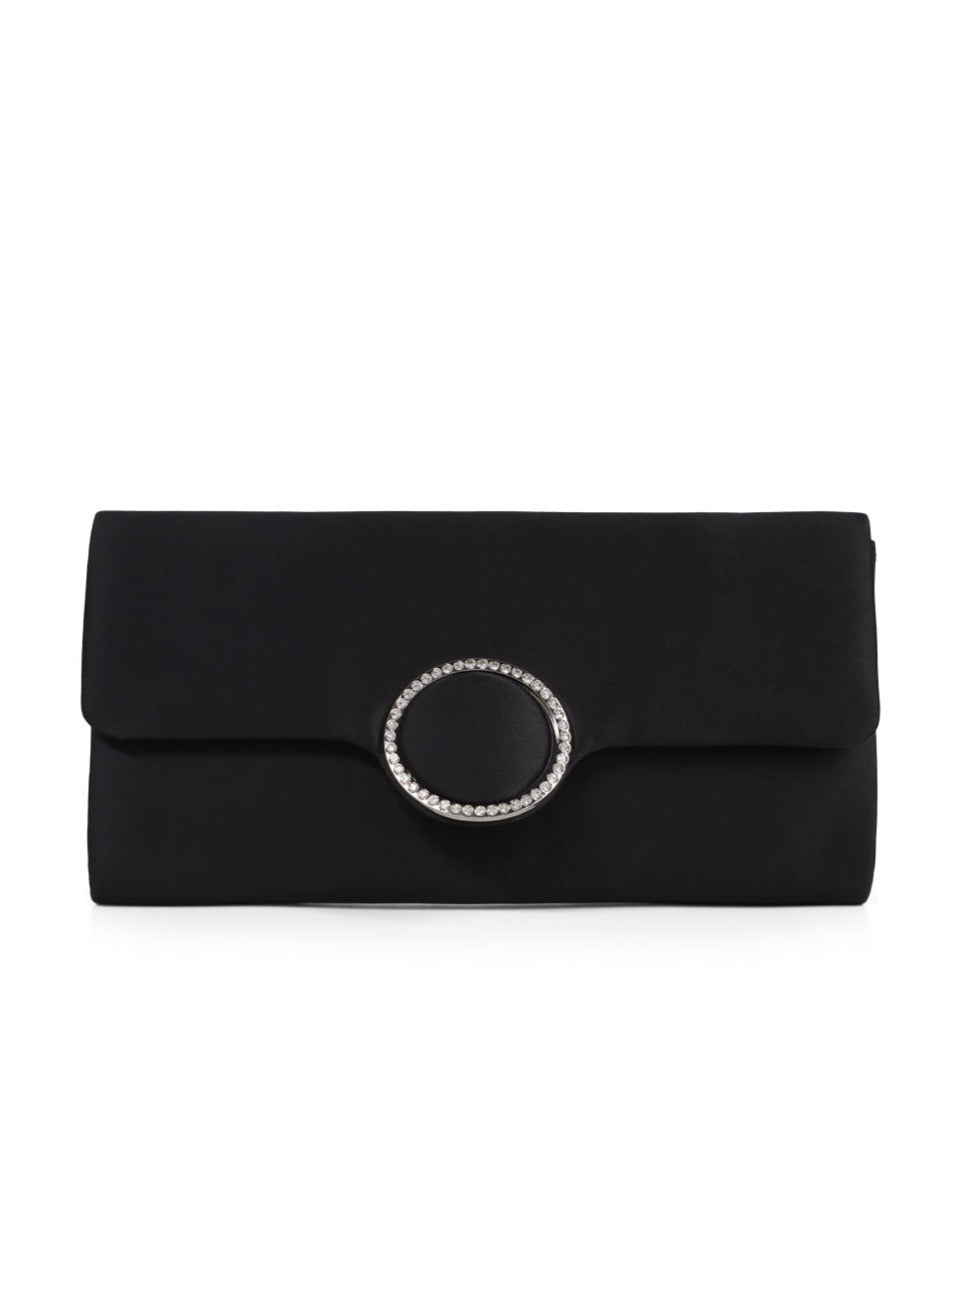 Satin Clutch with Diamante in Black | Occasion | Bag | Wedding guest | Wedding | Races | Clutch Bag | Women's Accessories | Women | Date Night | Cocktails | Evening Accessories | Evening Bag